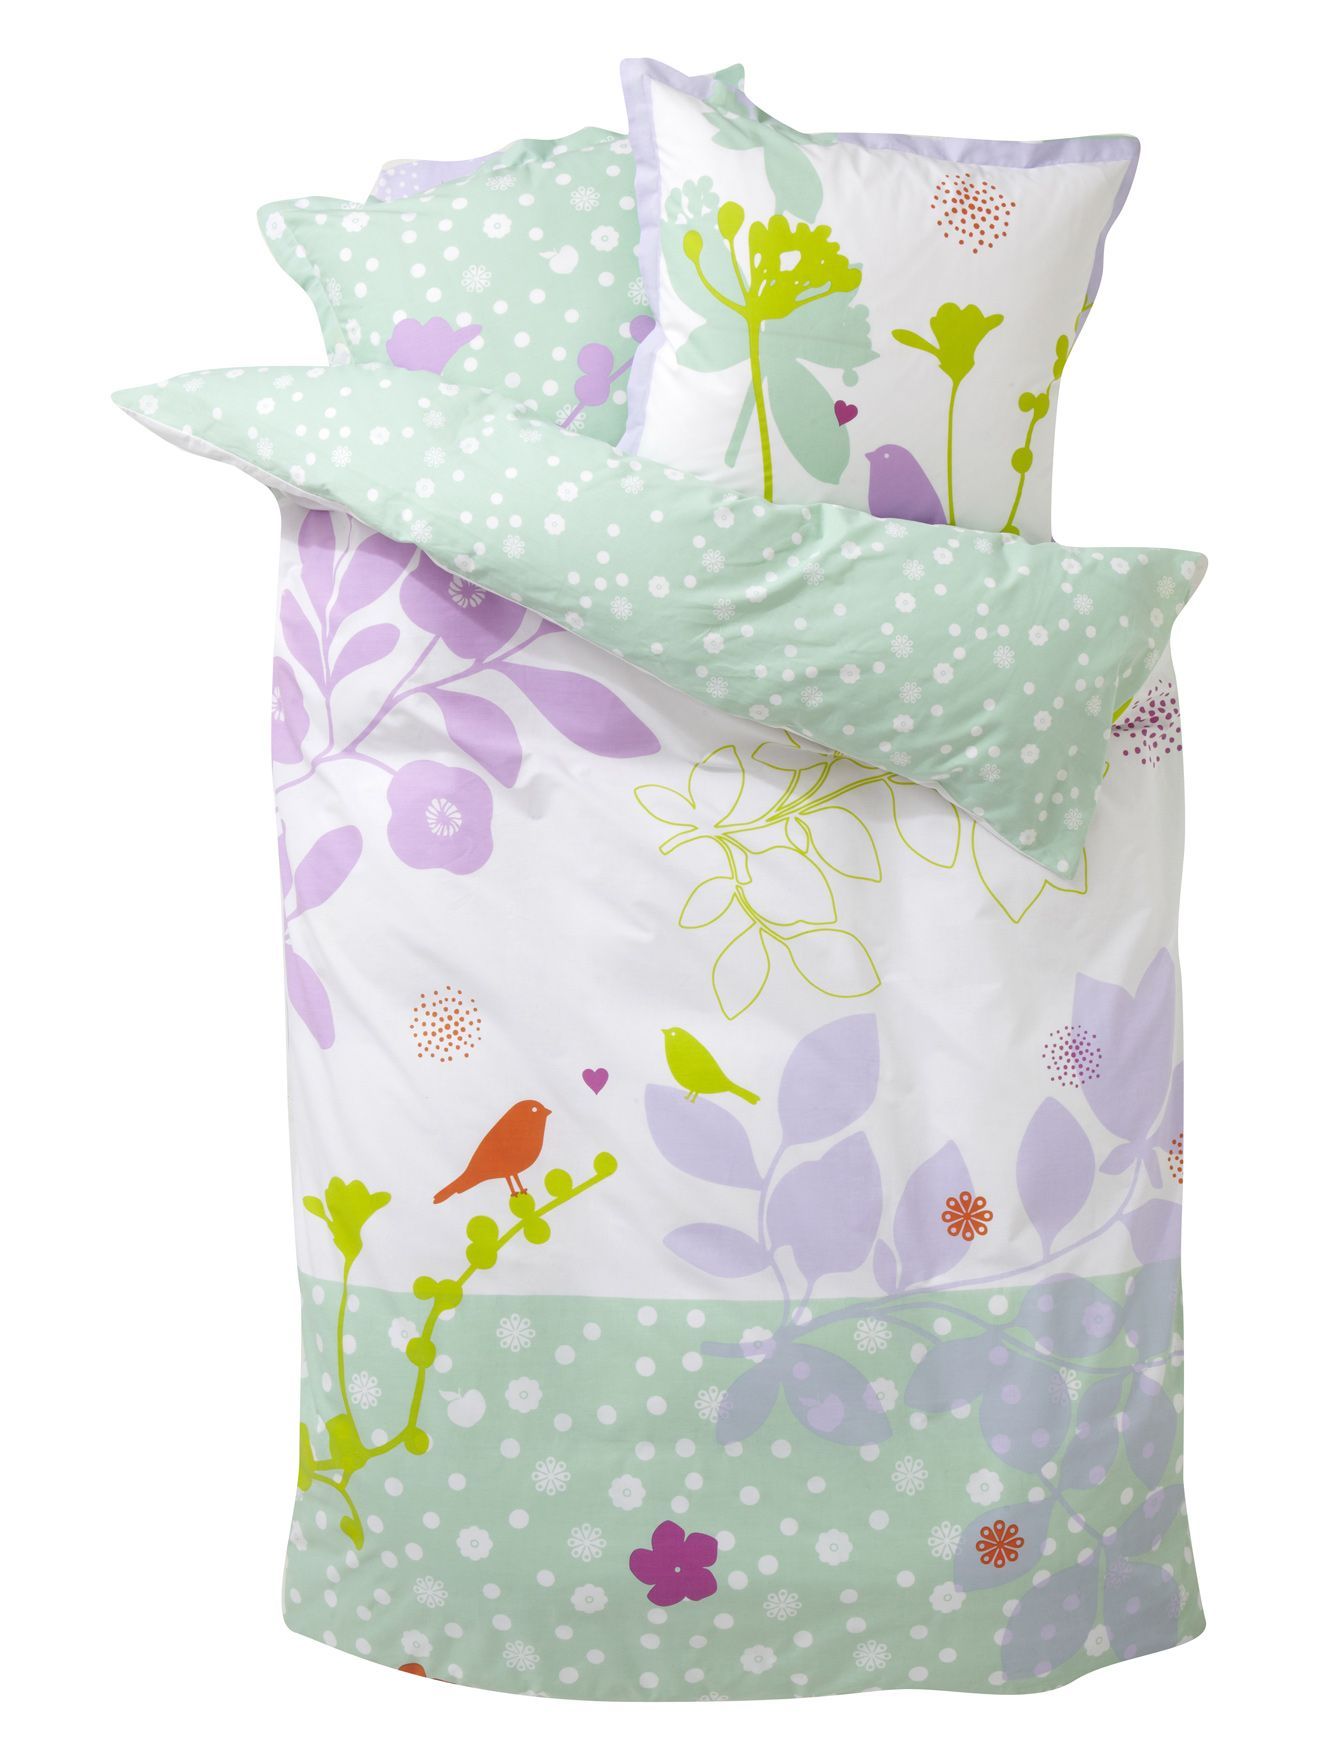 Toddler Bed: Arboretum Duvet Cover. I LOVE this!!! Would be so cute to make as h